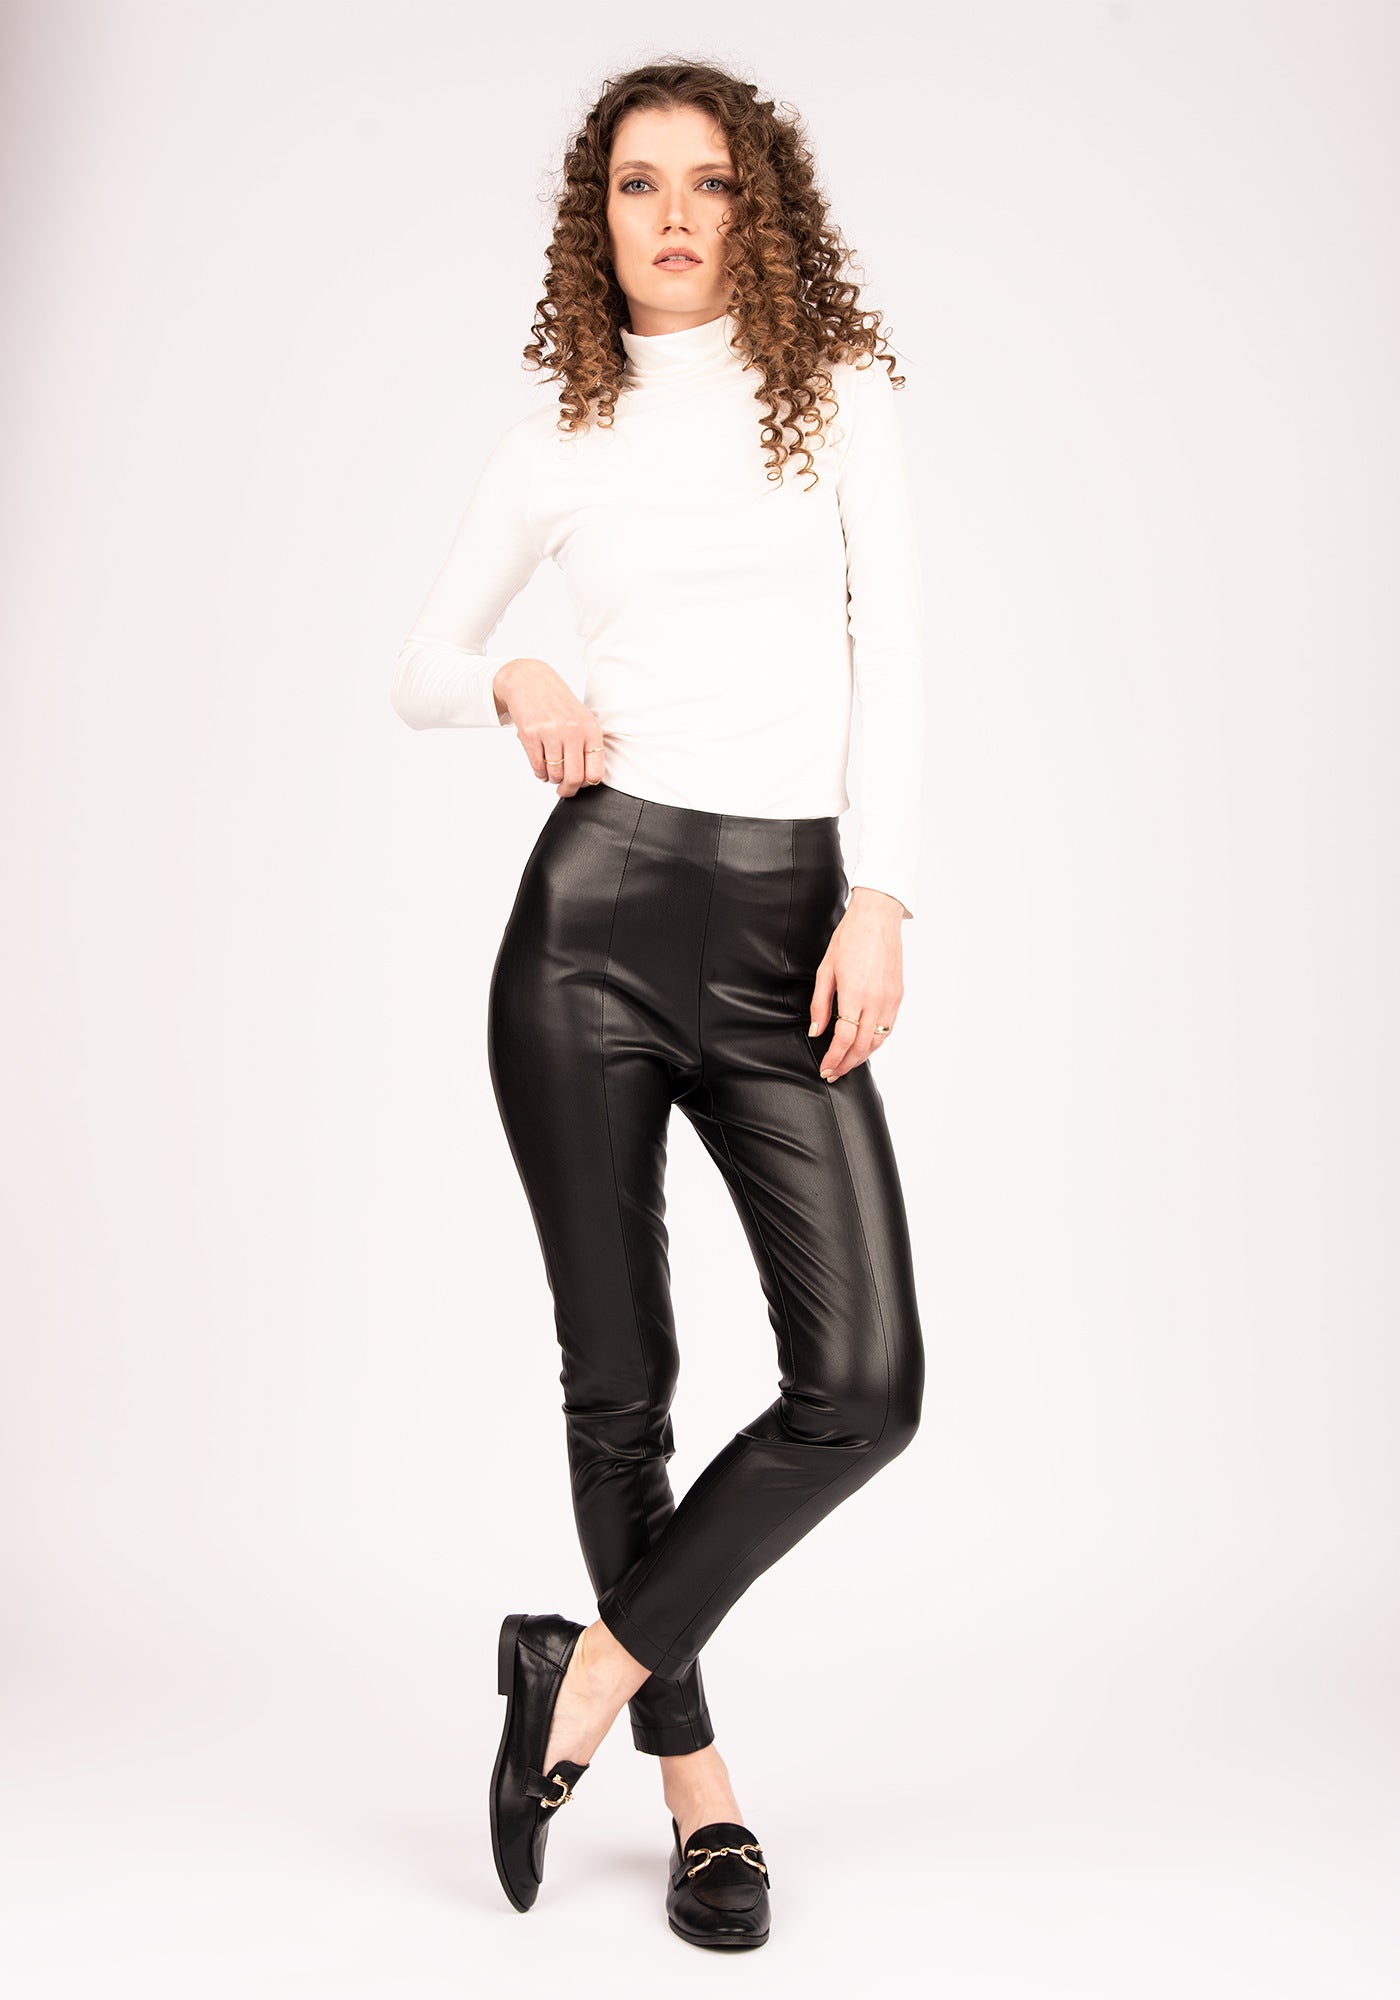 Women's High Waisted Faux Leather Pants in Black